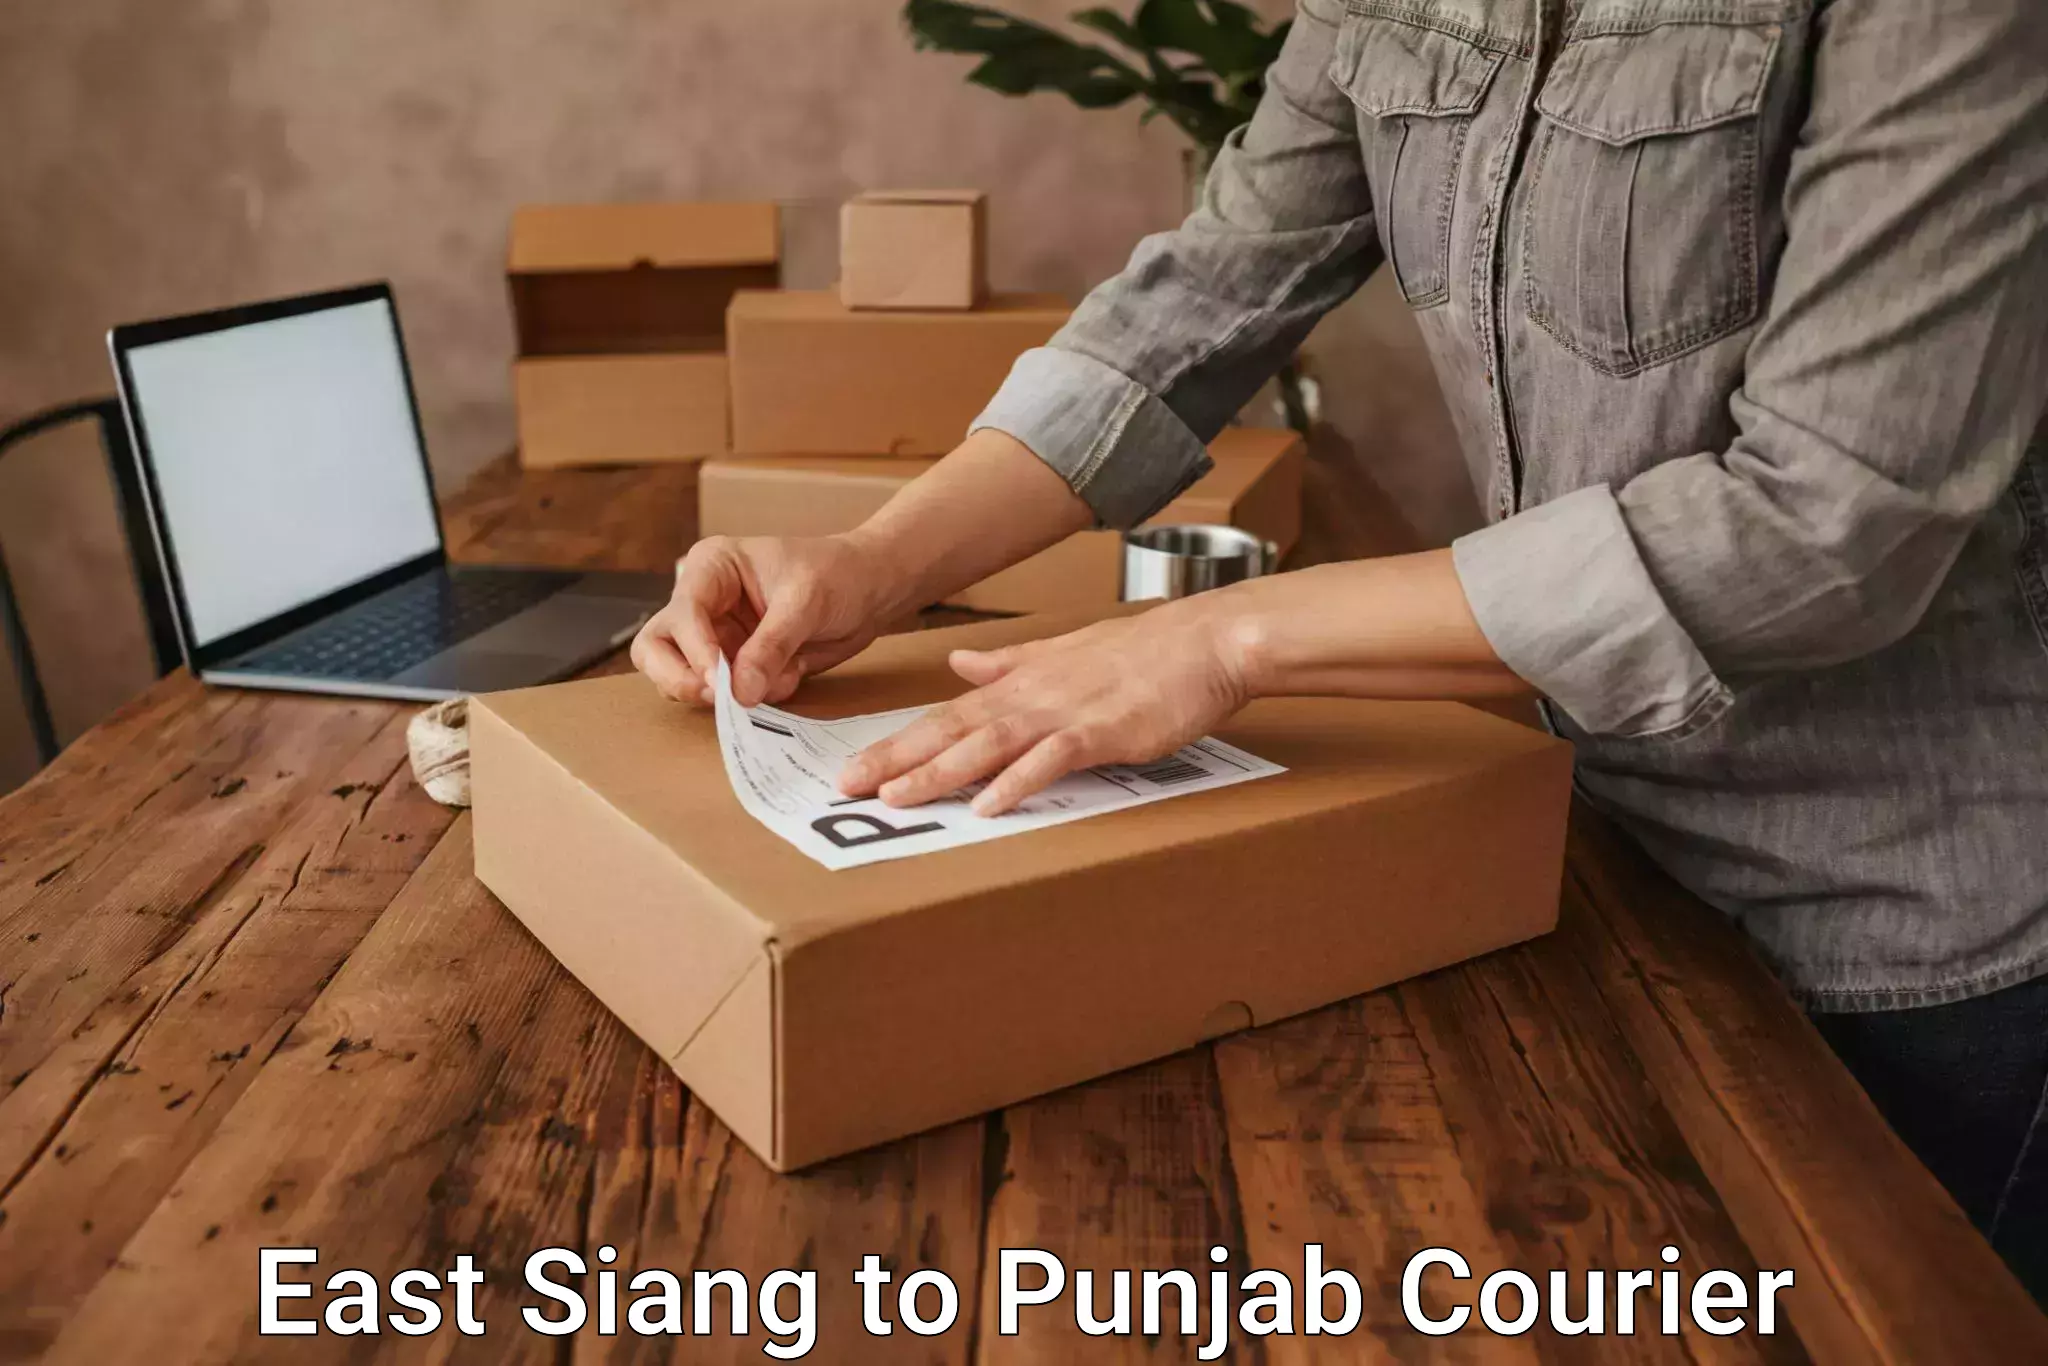 Courier service partnerships in East Siang to Goindwal Sahib